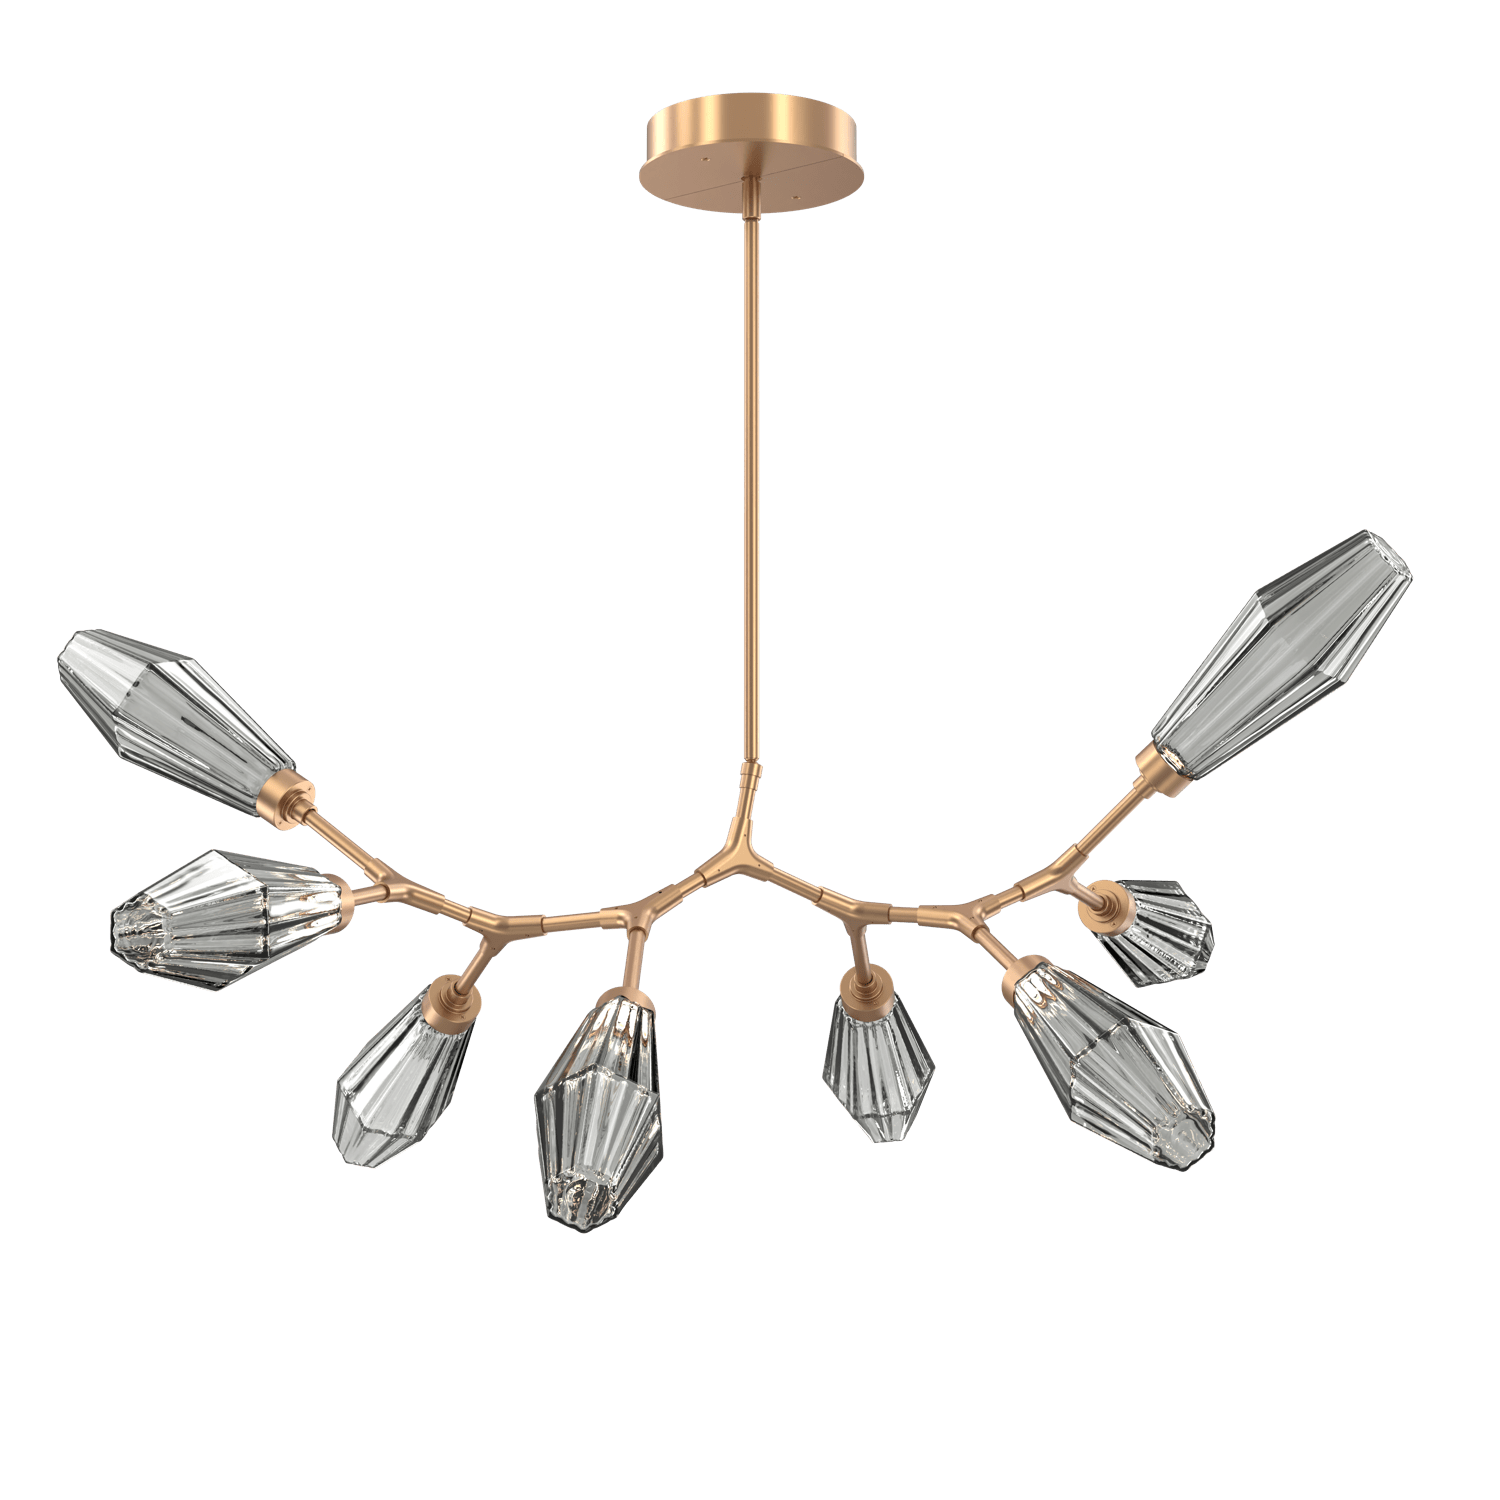 PLB0049-BB-NB-RS-Hammerton-Studio-Aalto-8-light-modern-branch-chandelier-with-novel-brass-finish-and-optic-ribbed-smoke-glass-shades-and-LED-lamping